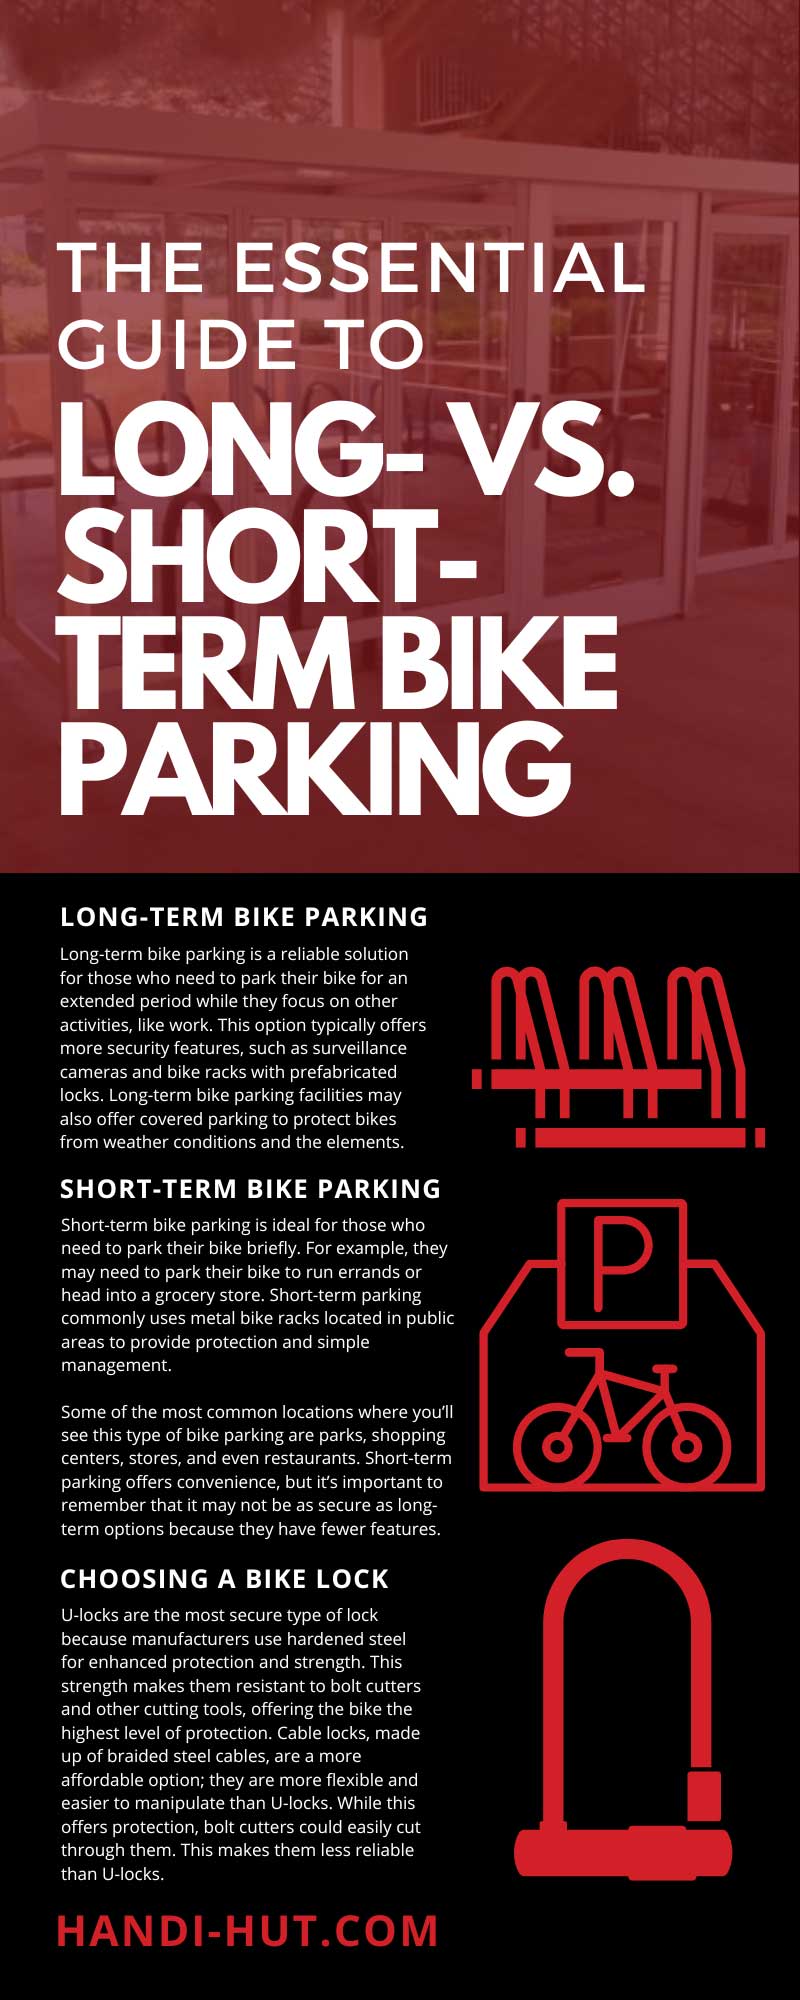 The Essential Guide to Long- vs. Short-Term Bike Parking